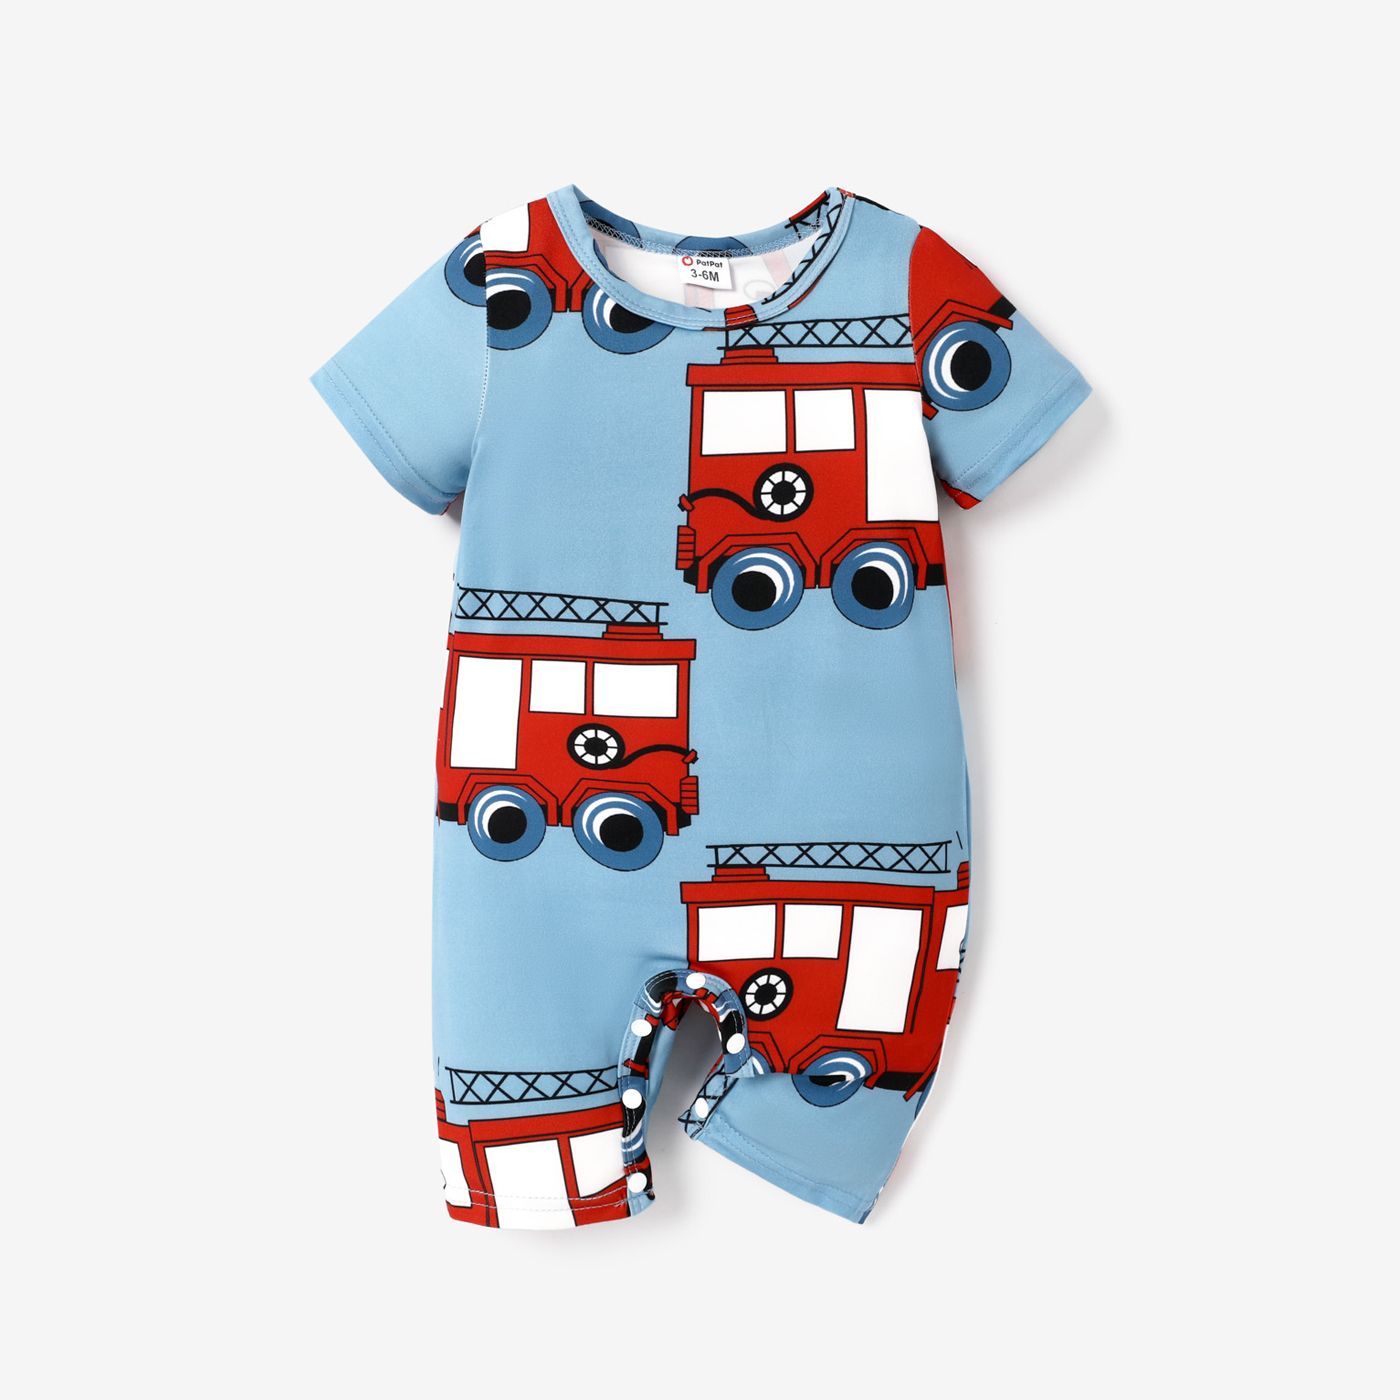 Baby Boy Fire Engine Pattern Romper/ 6 Pairs Of Socks/ Shoes